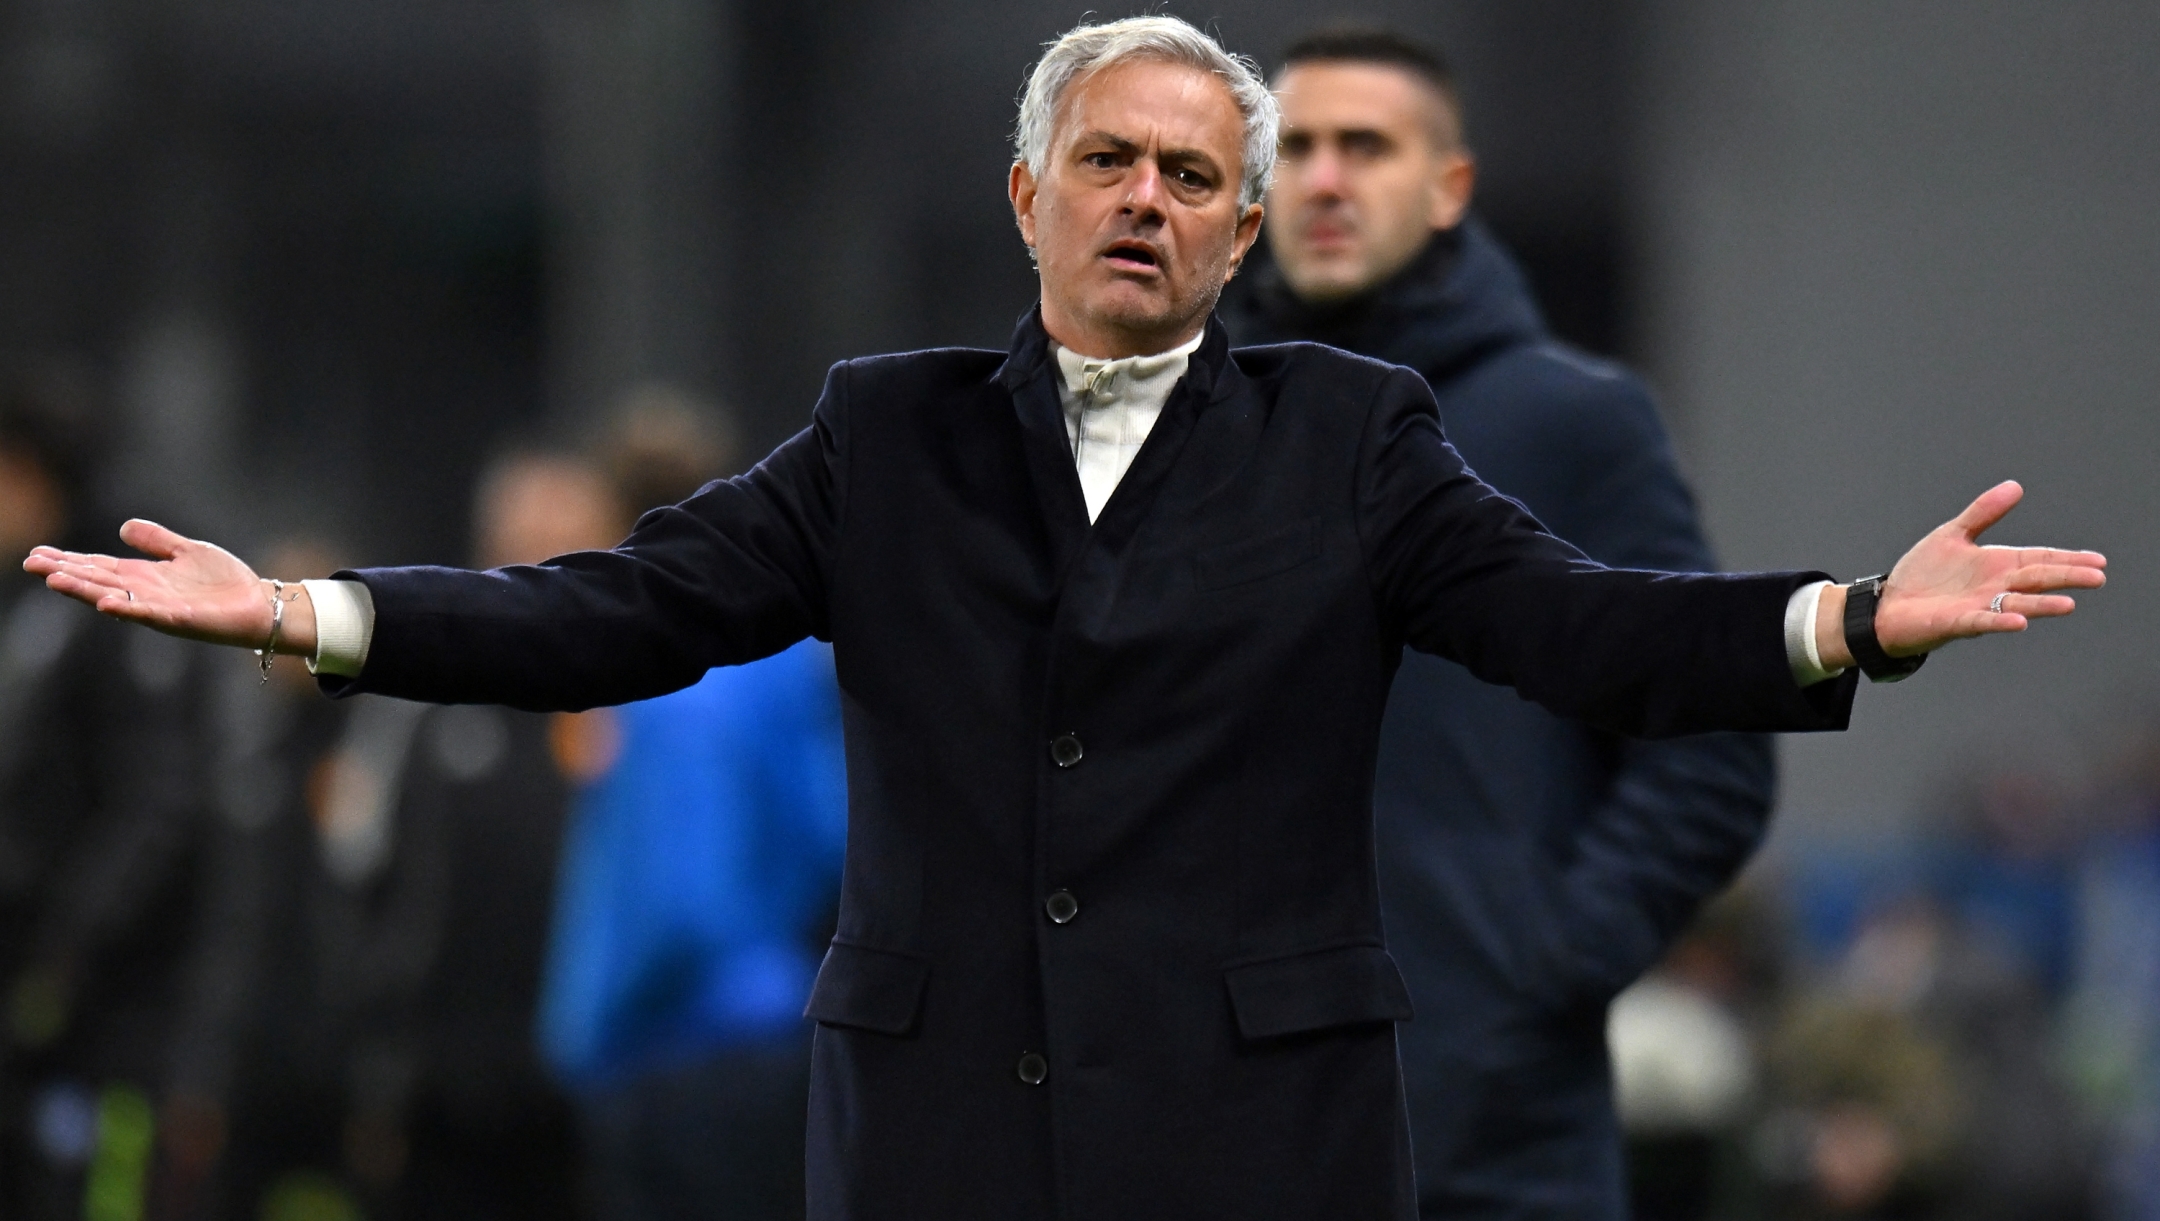 REGGIO NELL'EMILIA, ITALY - DECEMBER 03: Jose Mourinho, Head Coach of AS Roma, gestures during the Serie A TIM match between US Sassuolo and AS Roma at Mapei Stadium - Citta' del Tricolore on December 03, 2023 in Reggio nell'Emilia, Italy. (Photo by Alessandro Sabattini/Getty Images)